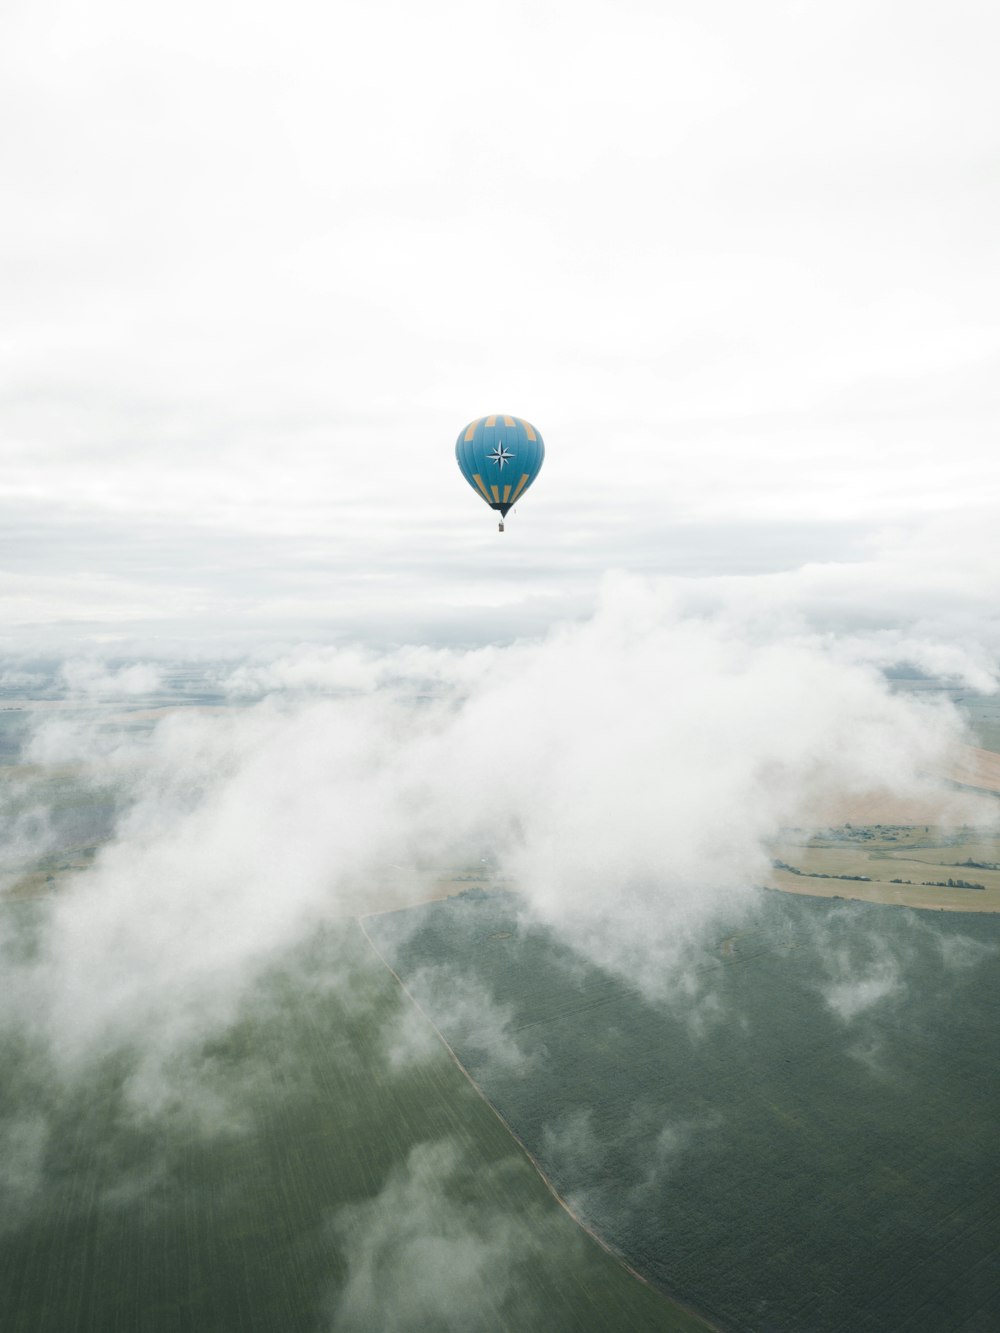 blue hot air balloon on mid air under white clouds during daytime